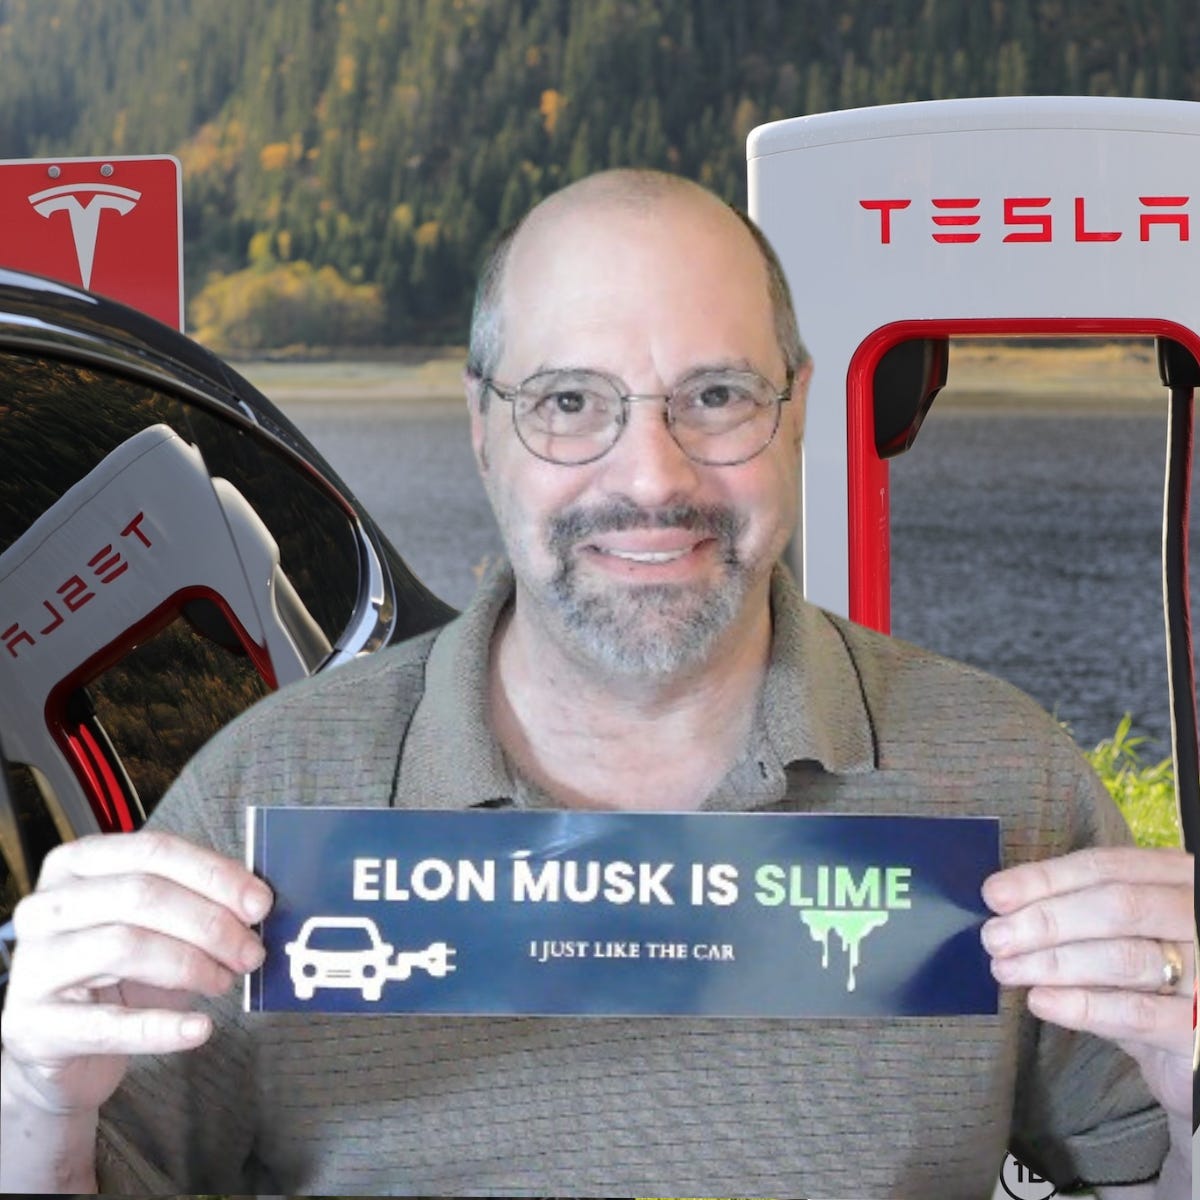 Me holding my new bumper sticker (Elon Musk Is Slime. I just like the car) on a background of a Tesla charging station.